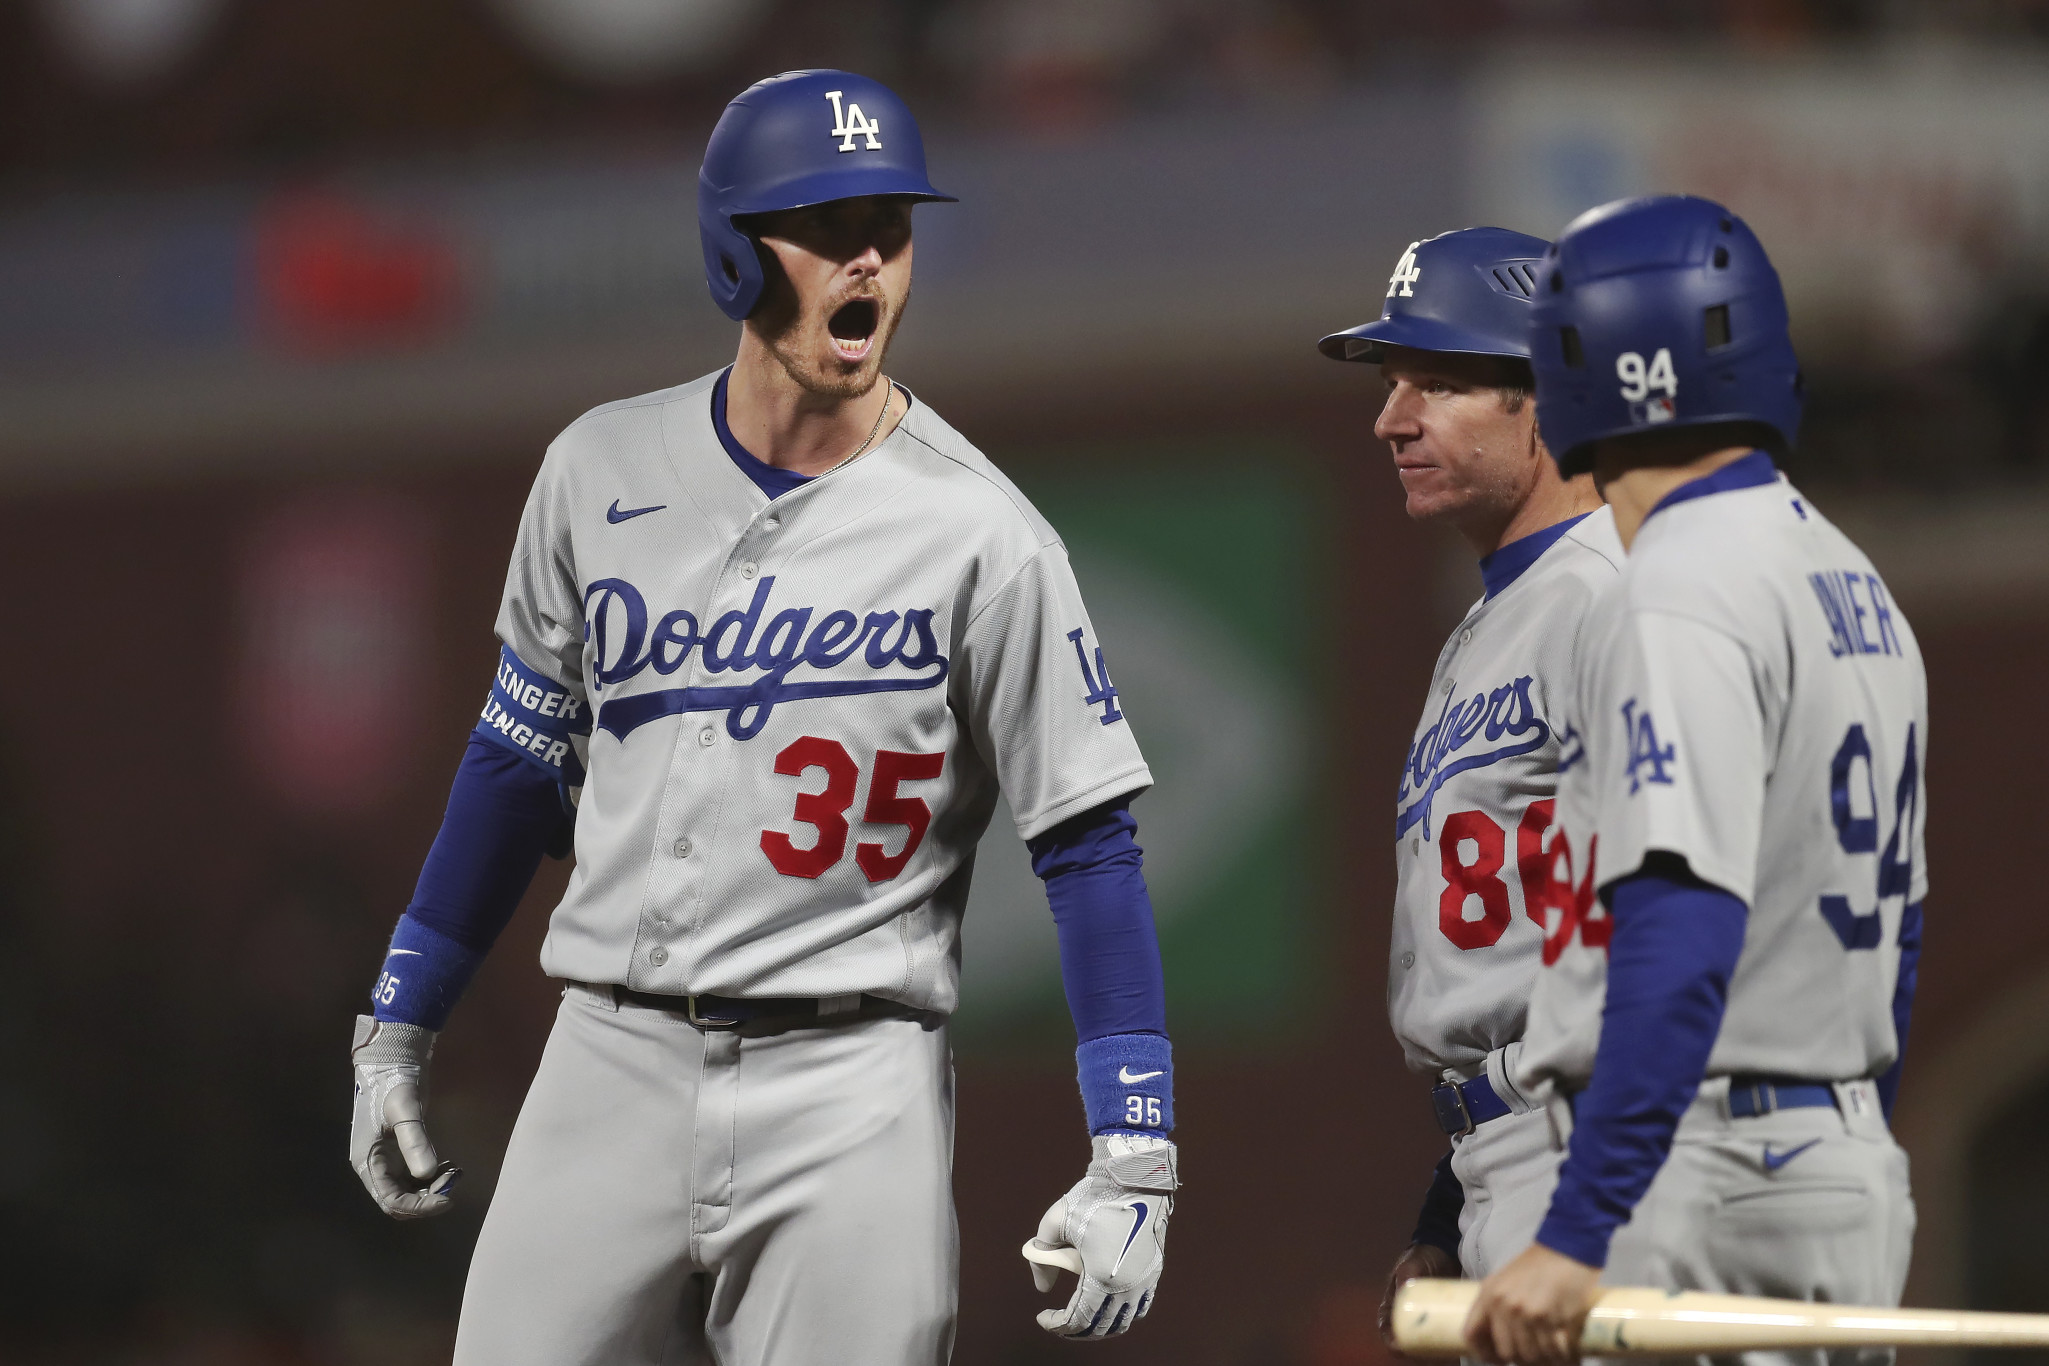 Cody Bellinger drives in the game-winning run in the top of the